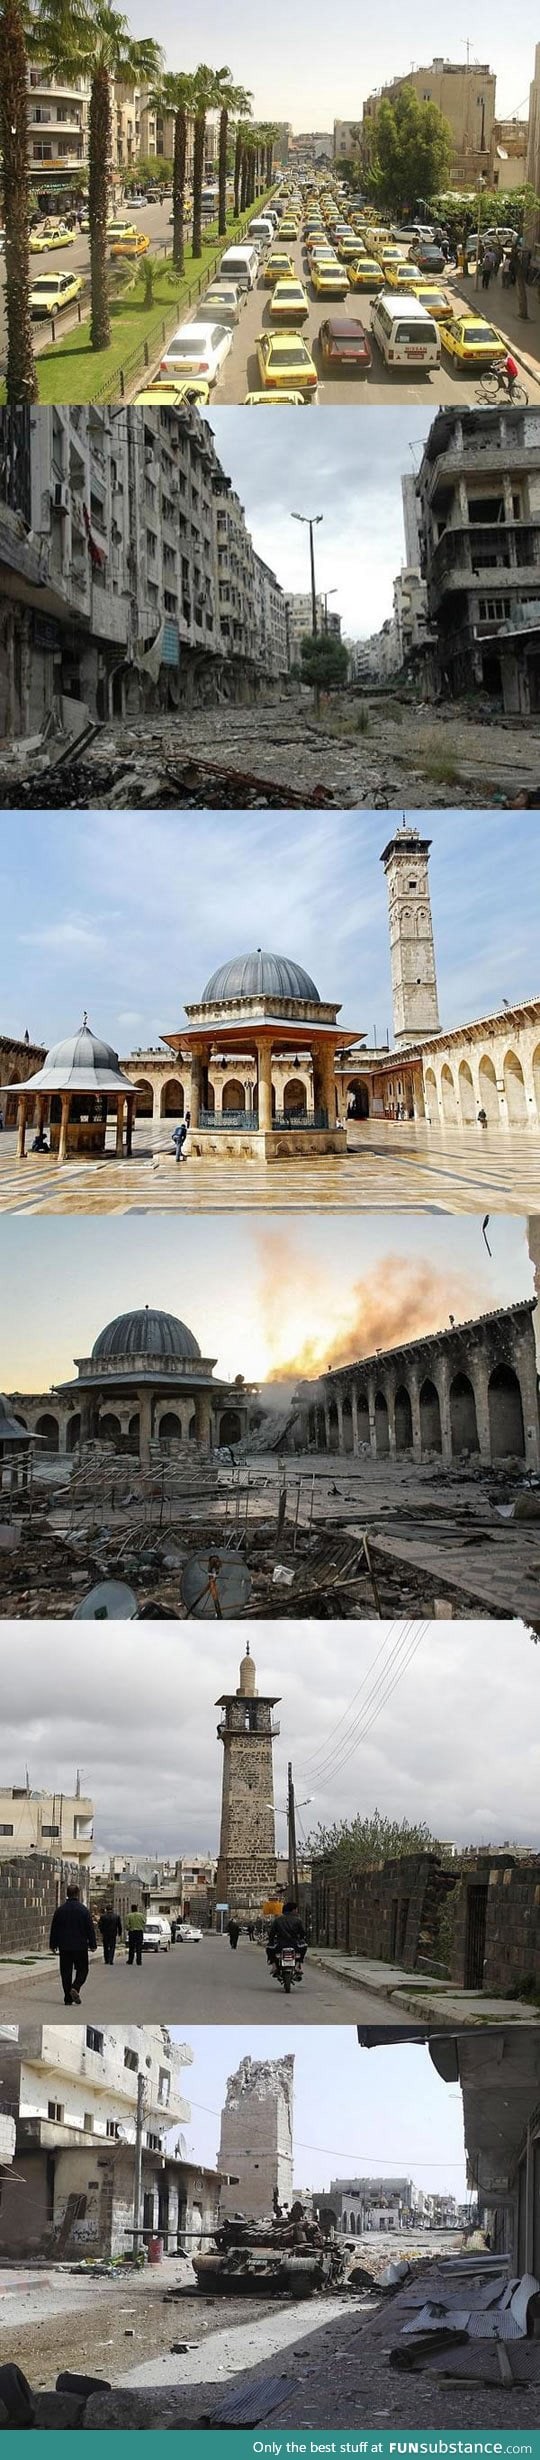 Damascus, syria, before and after